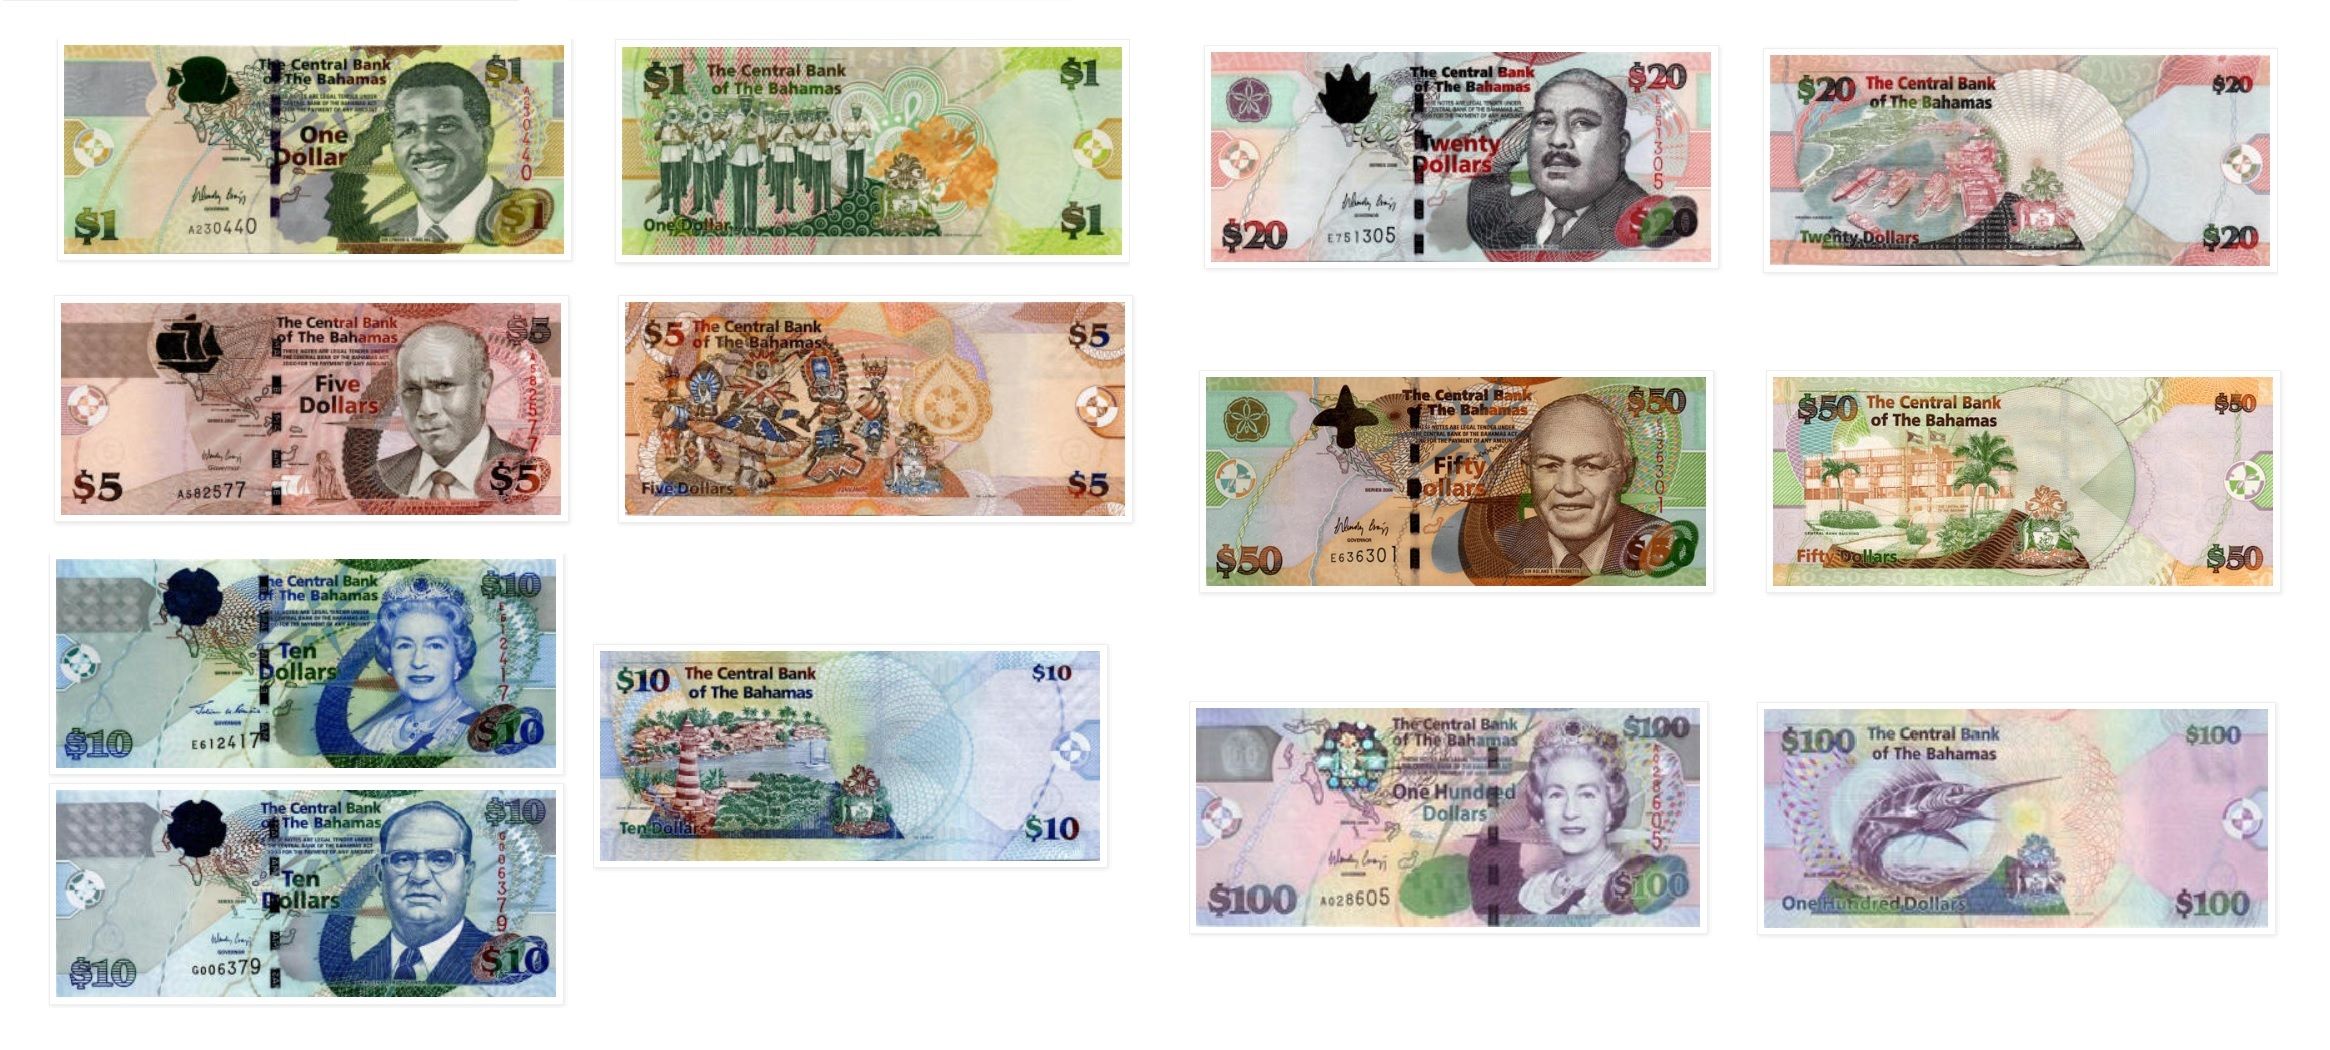 Bahamian Currency - front and back | Element Bank Board | Pinterest